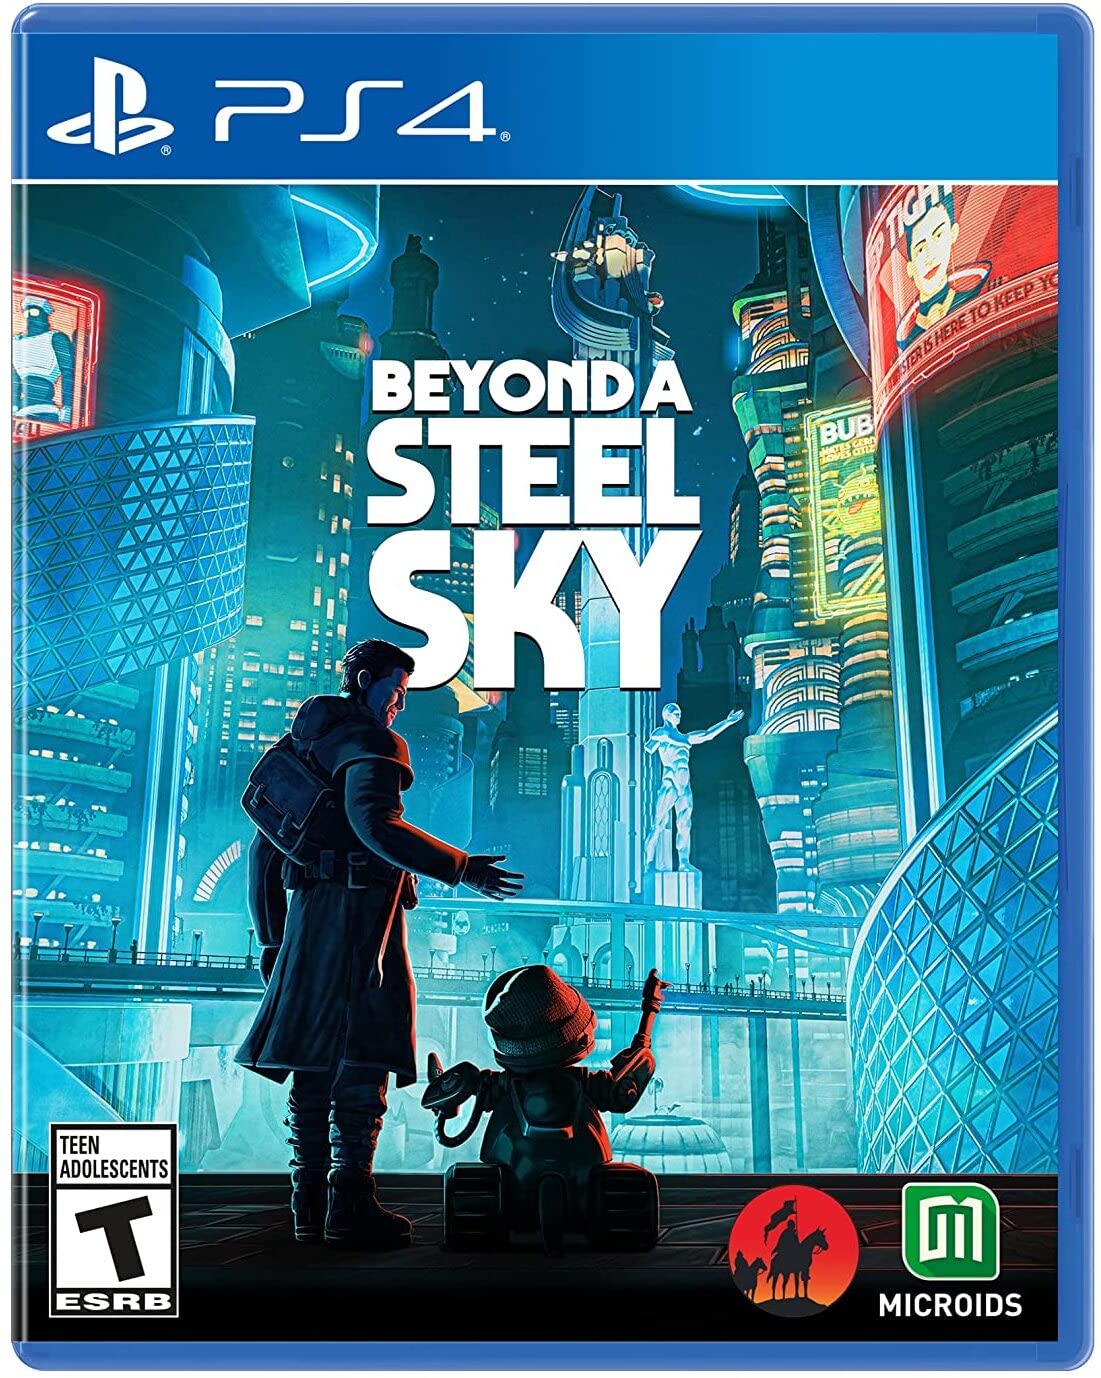 Beyond A Steel Sky - Standard Edition (PS4) $15.83 + Free Shipping w/ Prime or on $25+